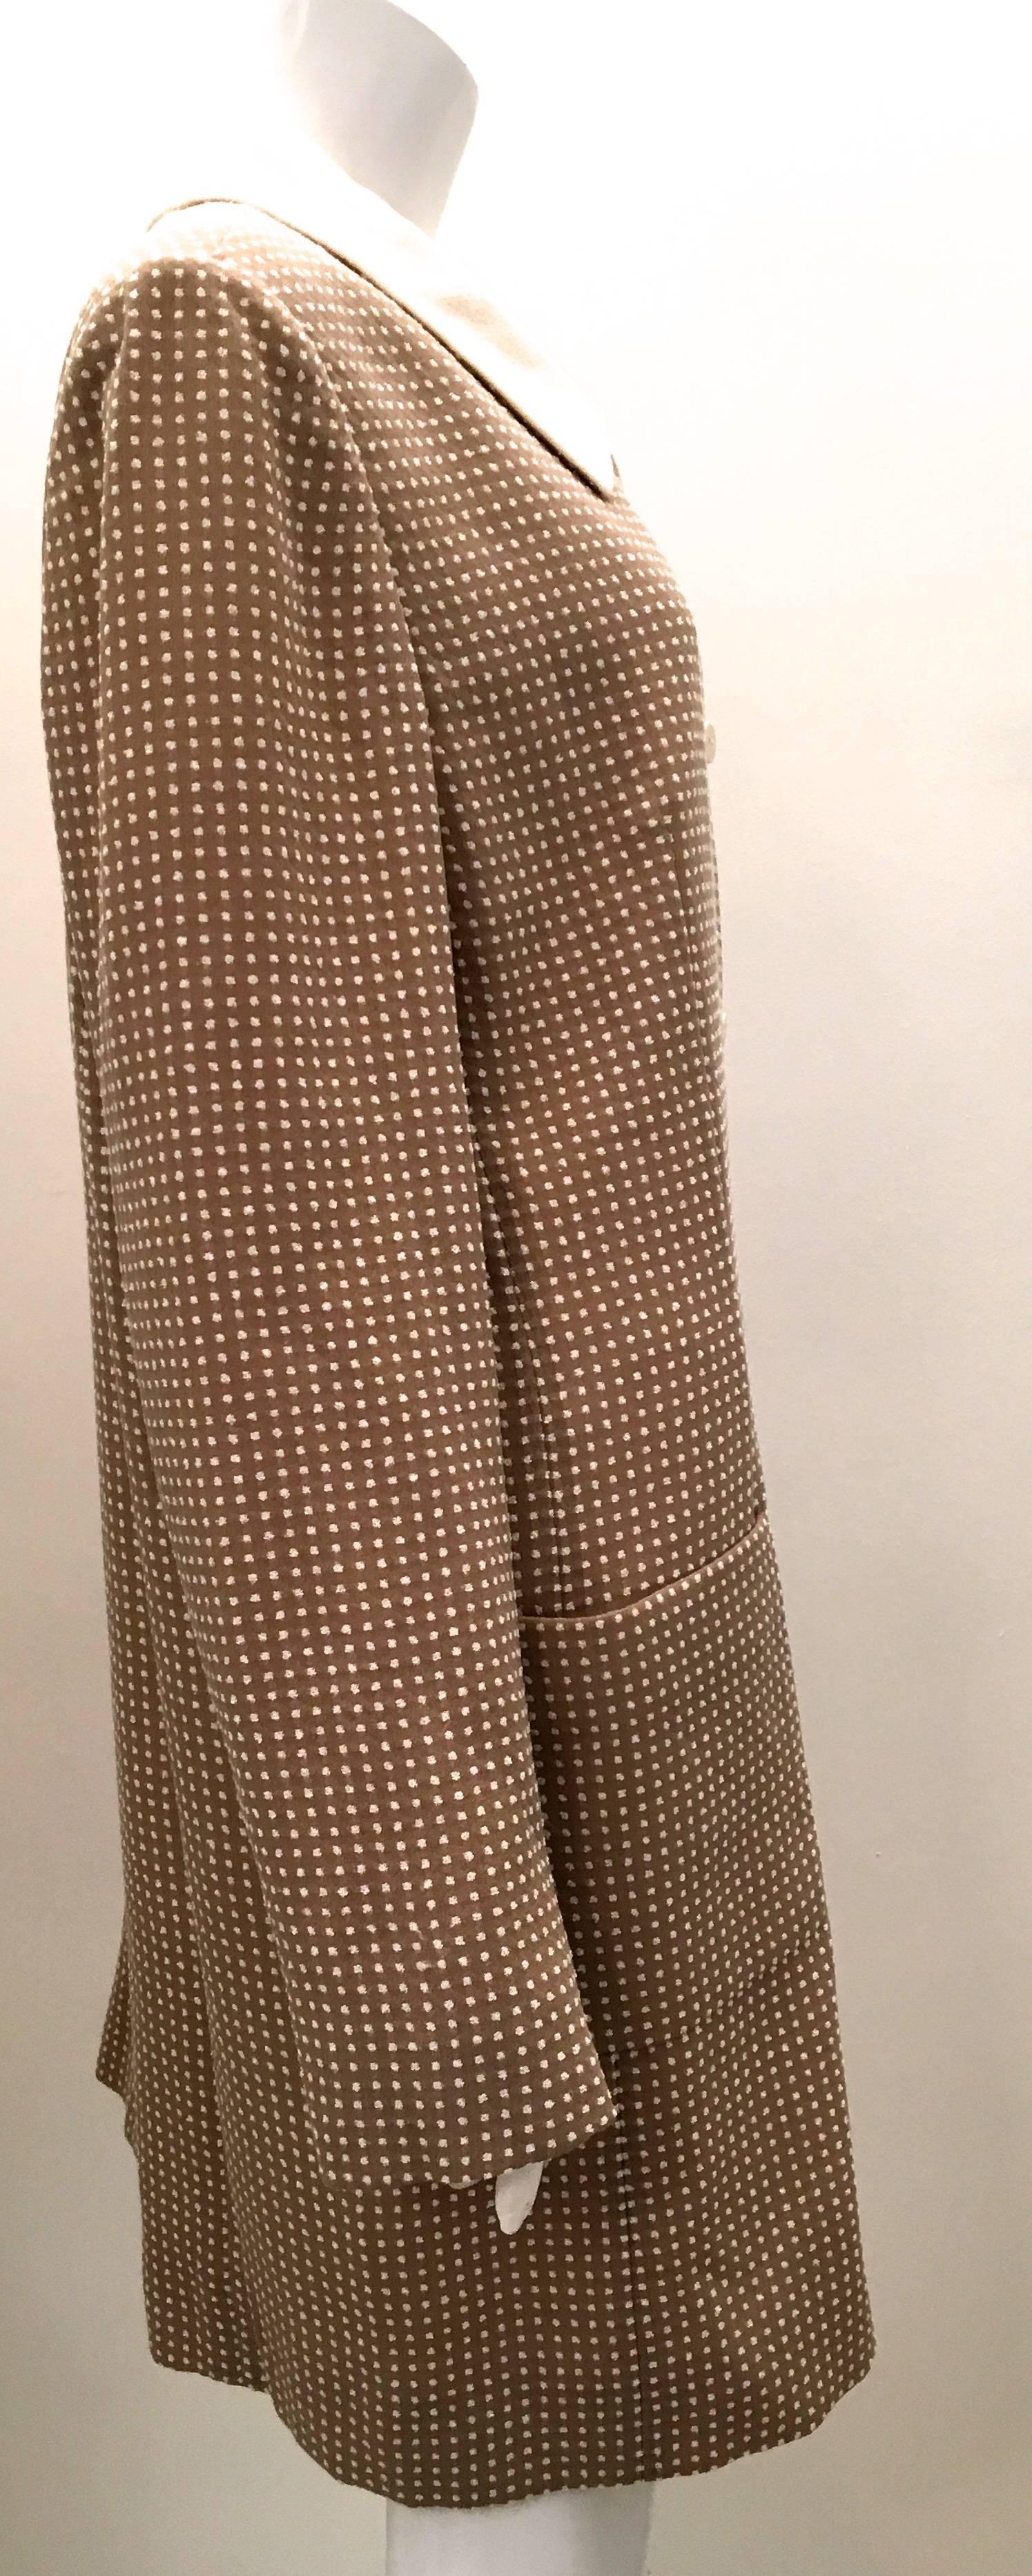 Presented here is a Bill Blass coat from the 1970's. The coat is beige on the exterior with small white polka dots patterned throughout the outside of the coat. The collar is white. The inside of the coat is entirely lined in white silk. There are